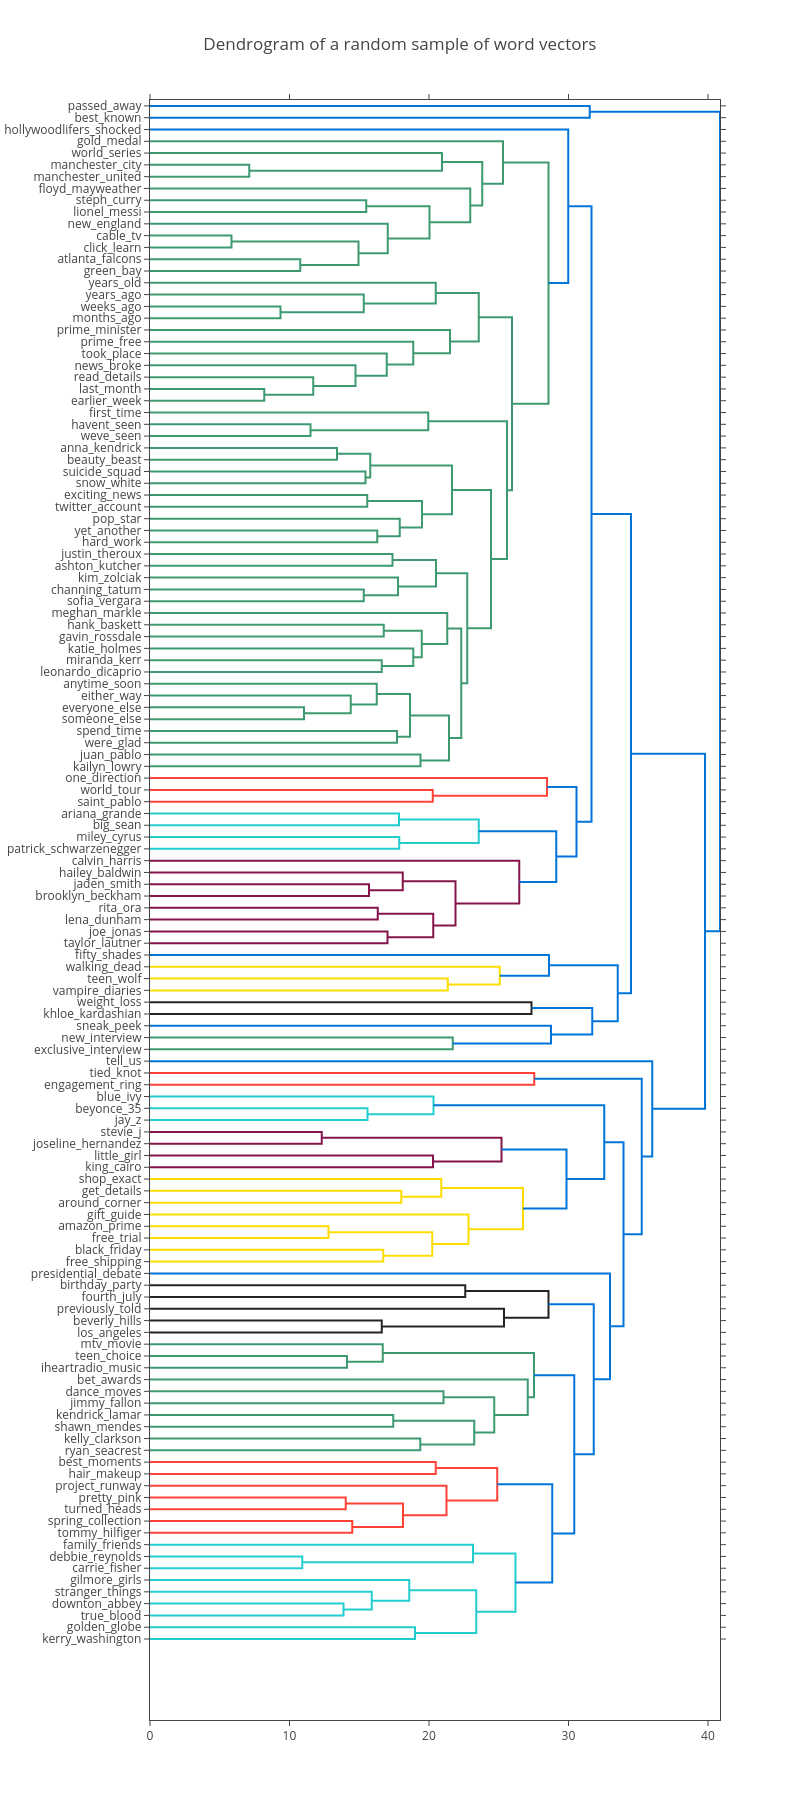 Dendrogram of a random sample of word vectors | line chart made by Andrewm4894 | plotly